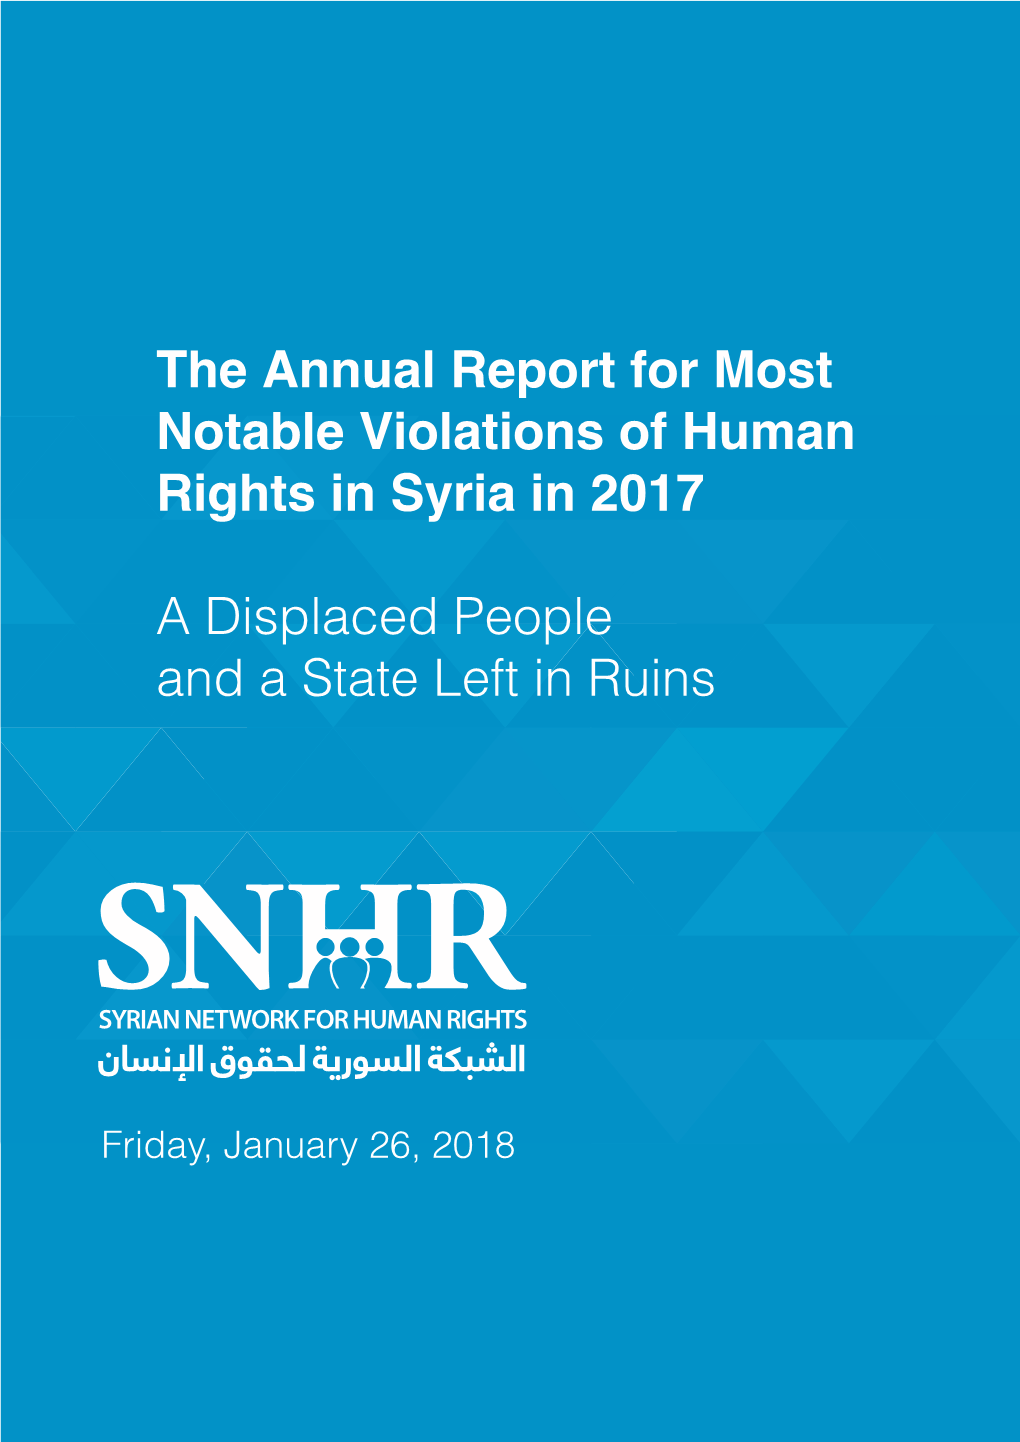 The Annual Report for Most Notable Violations of Human Rights in Syria in 2017